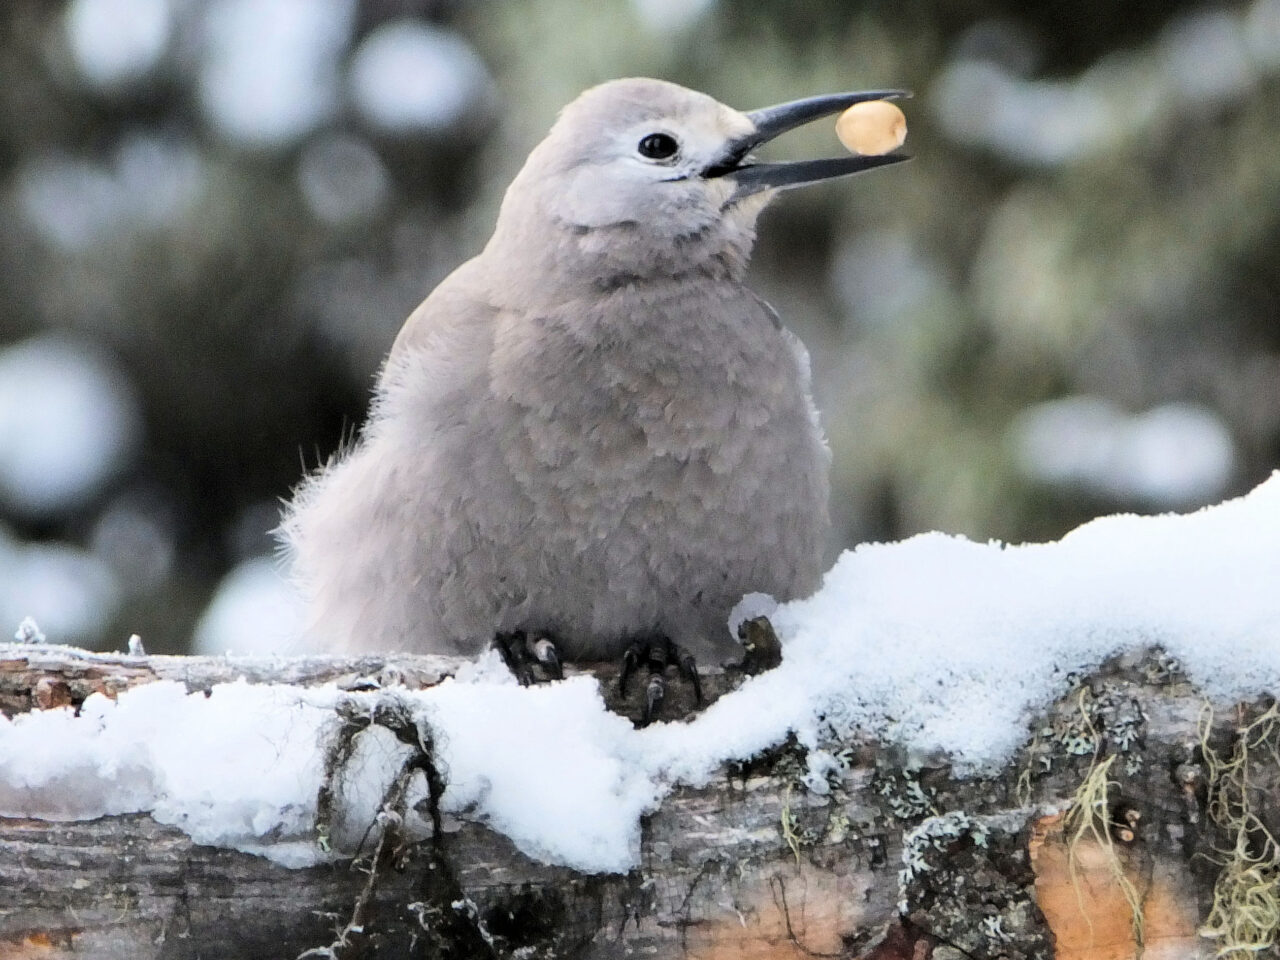 A Clark’s nutcracker holds a whitebark pine seed in its beak. As whitebark pine trees in core restoration areas mature and develop cones, the nutcracker will aid recovery by extracting the seeds and dispersing them across the landscape. Keith Roper